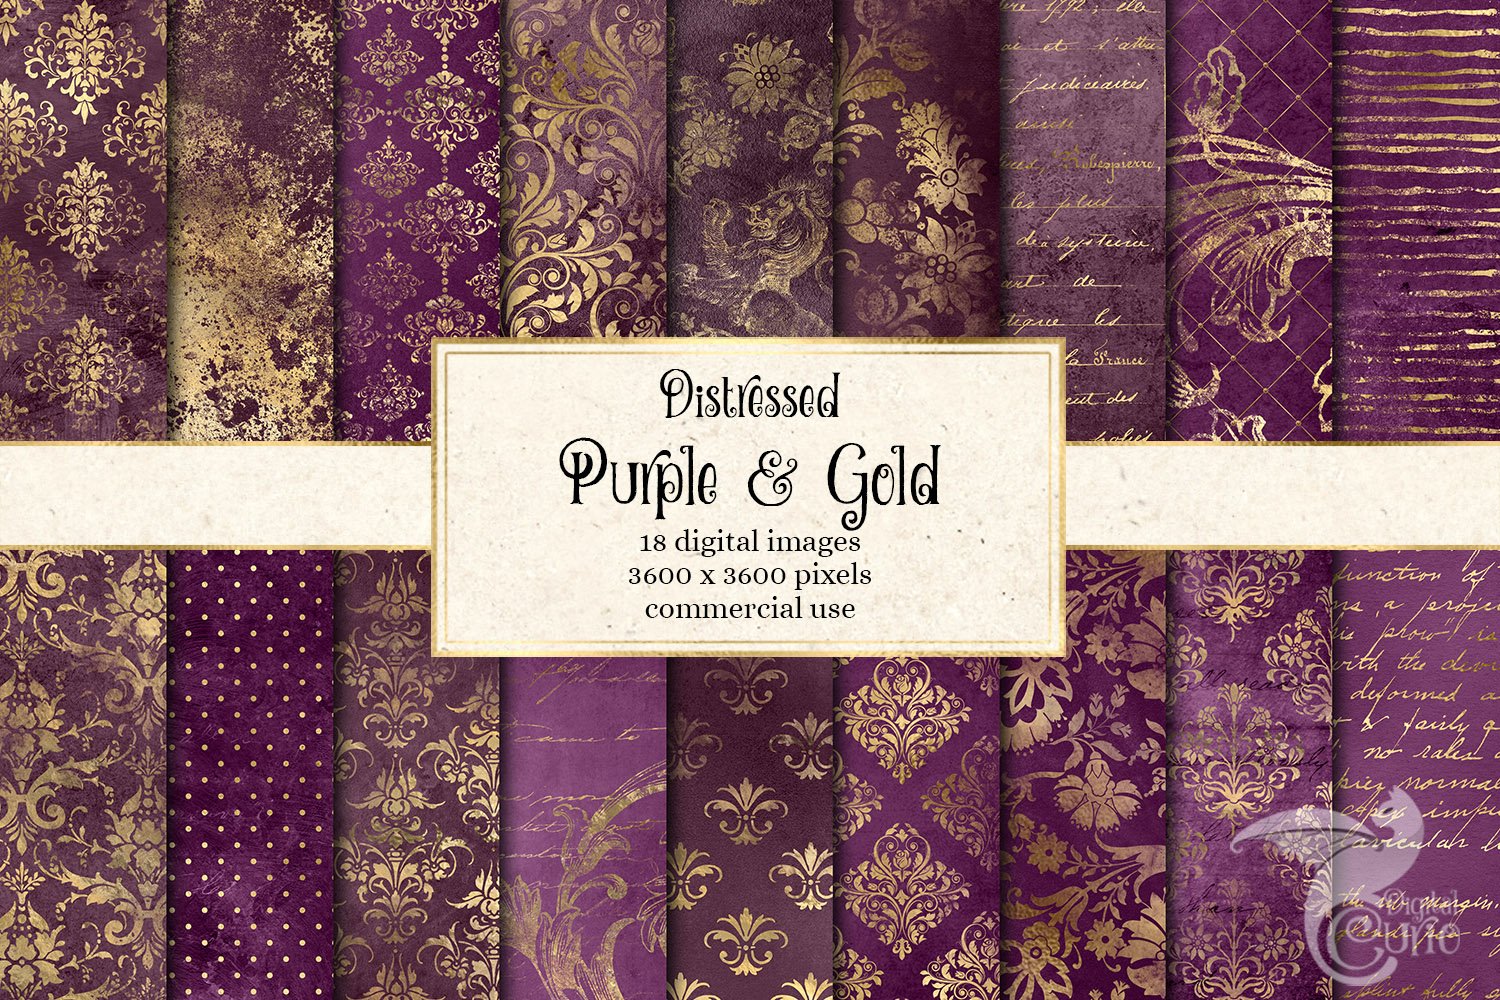 Distressed Purple and Gold Textures cover image.